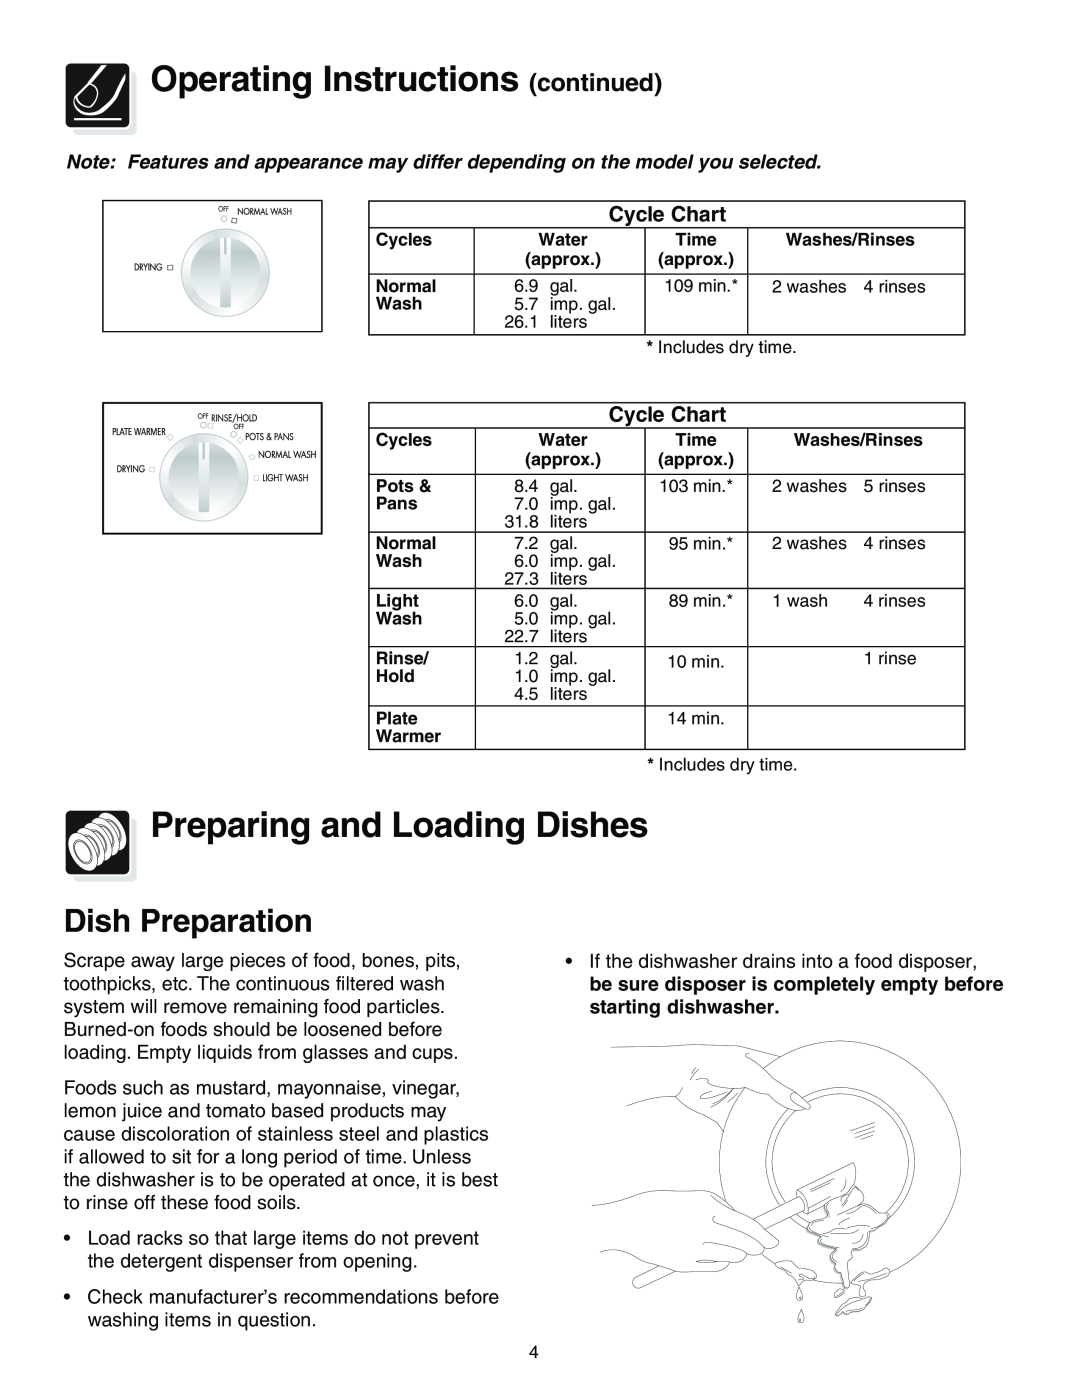 Crosley 200 Series warranty Operating Instructions continued, Preparing and Loading Dishes, Dish Preparation, Cycle Chart 